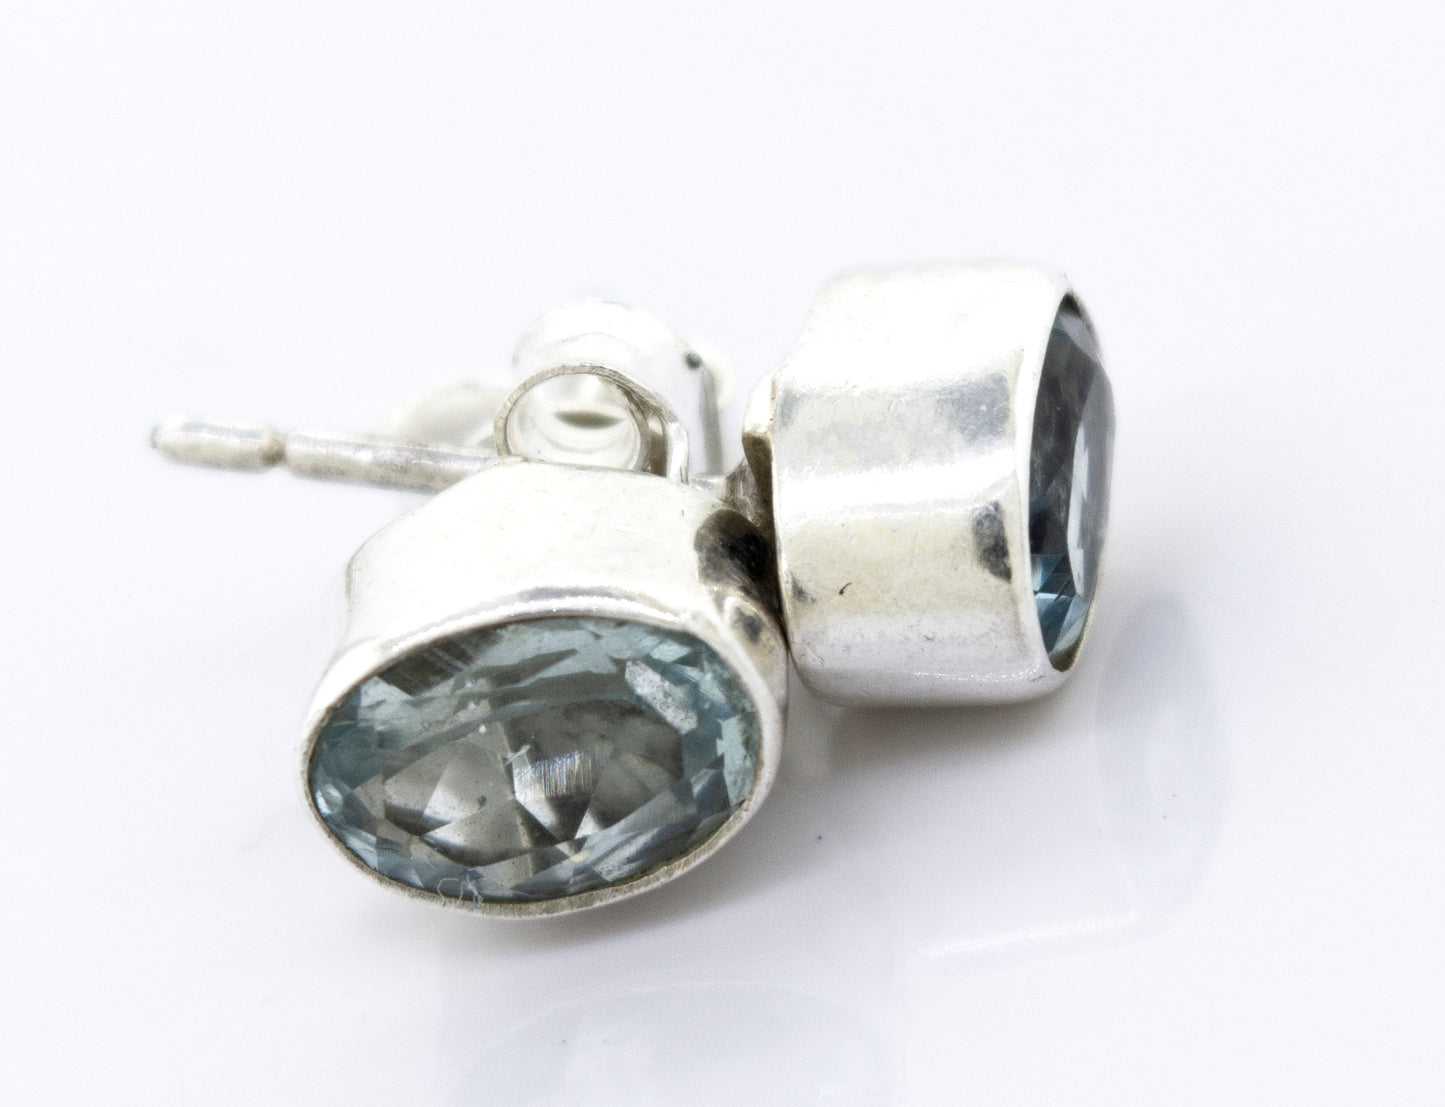 A pair of Beautiful Oval Faceted Cut Blue Topaz Studs from Super Silver in a silver setting on a white surface.